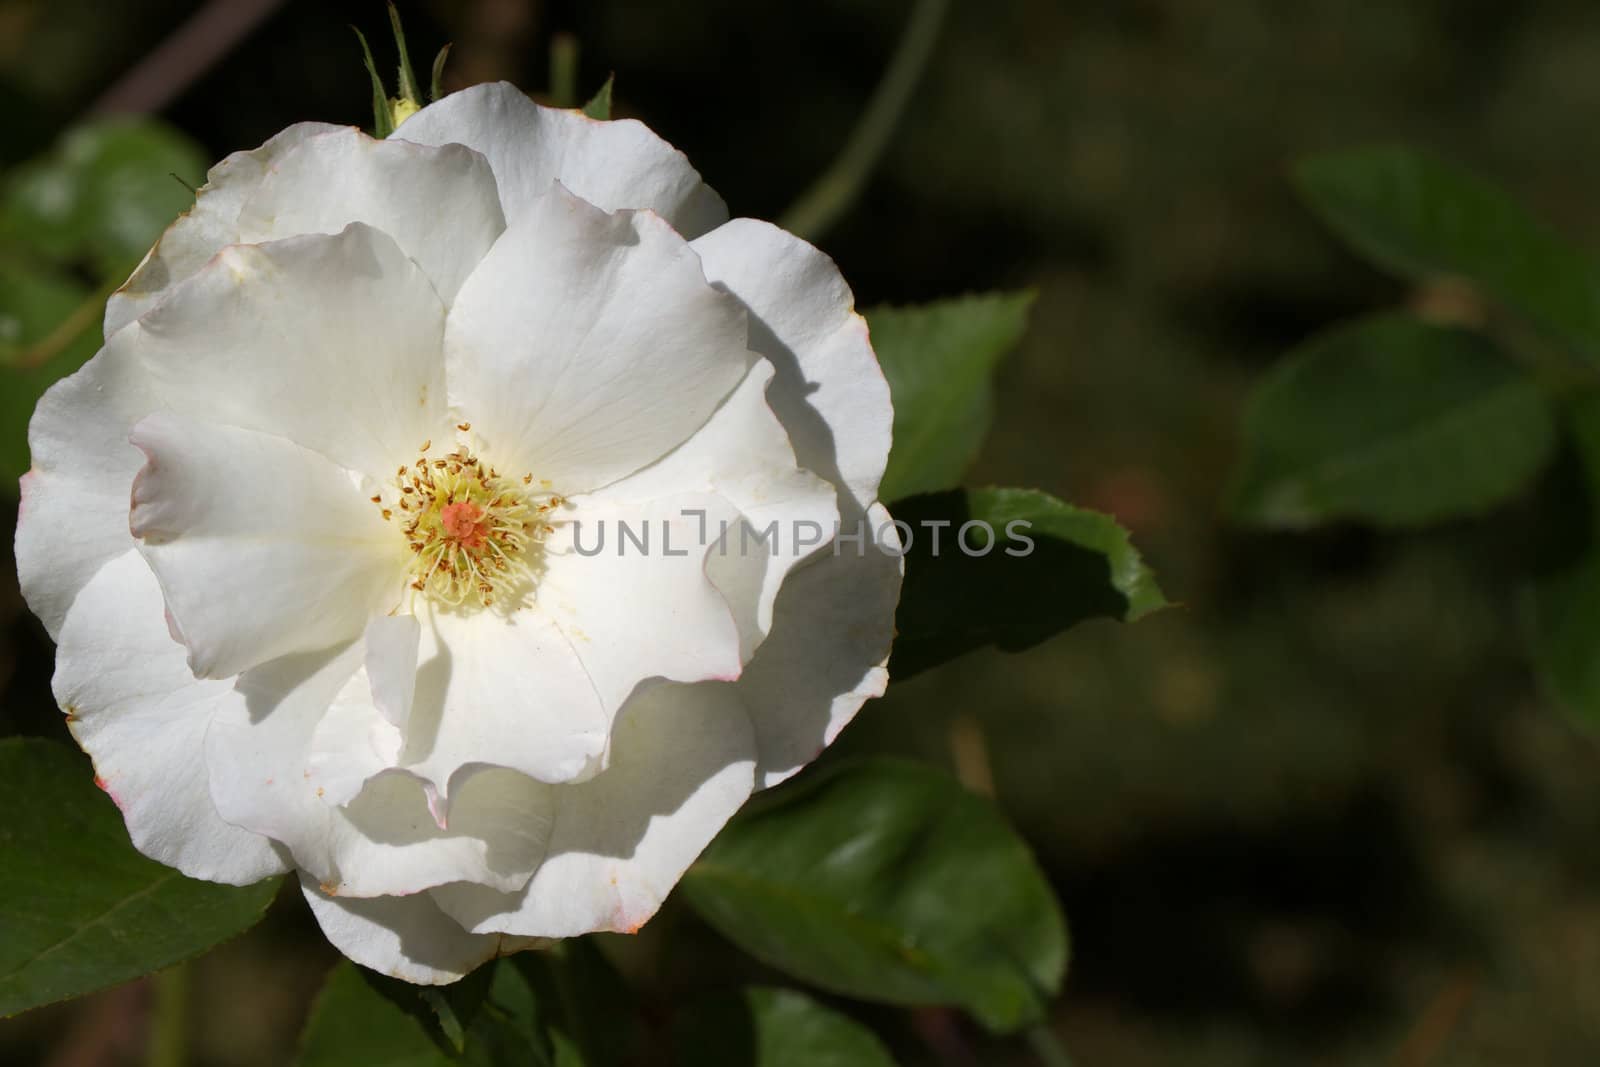 Macro of large mature white rose with soft background